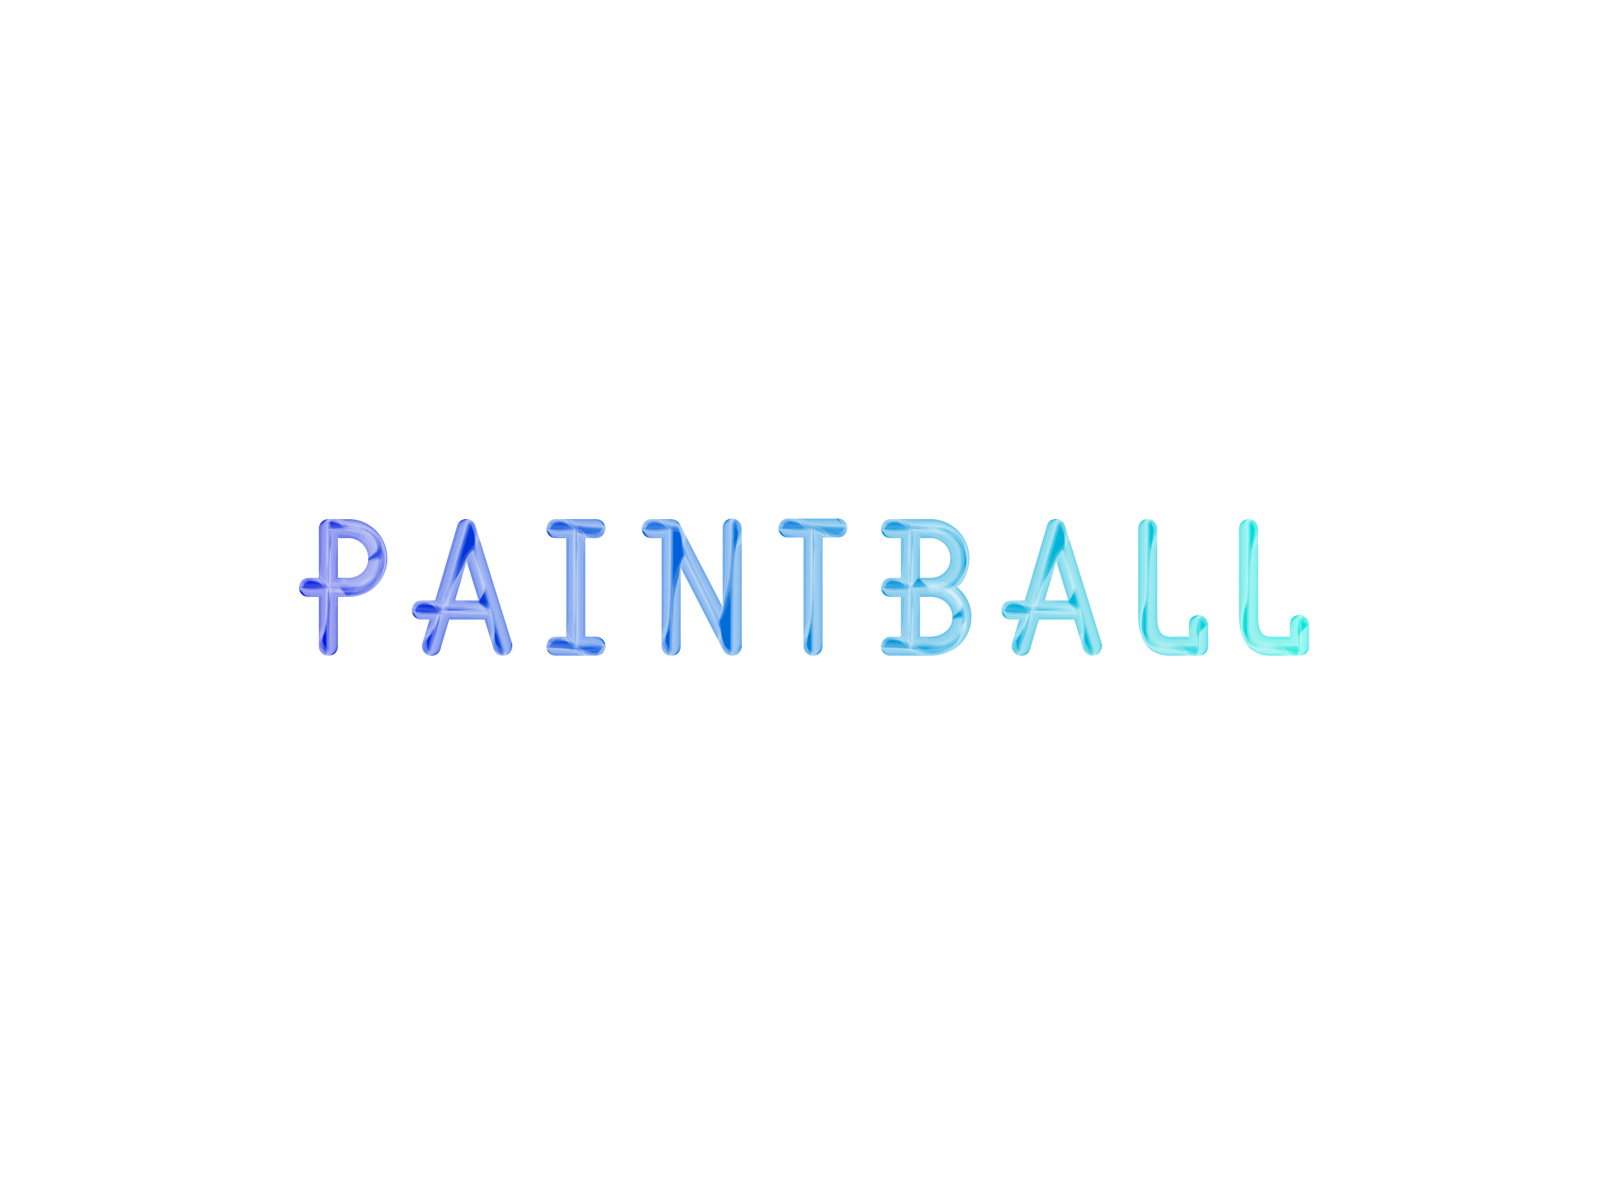 Bigpaintball Robloxgame Notfinished By Icytea On Dribbble - robloxgam